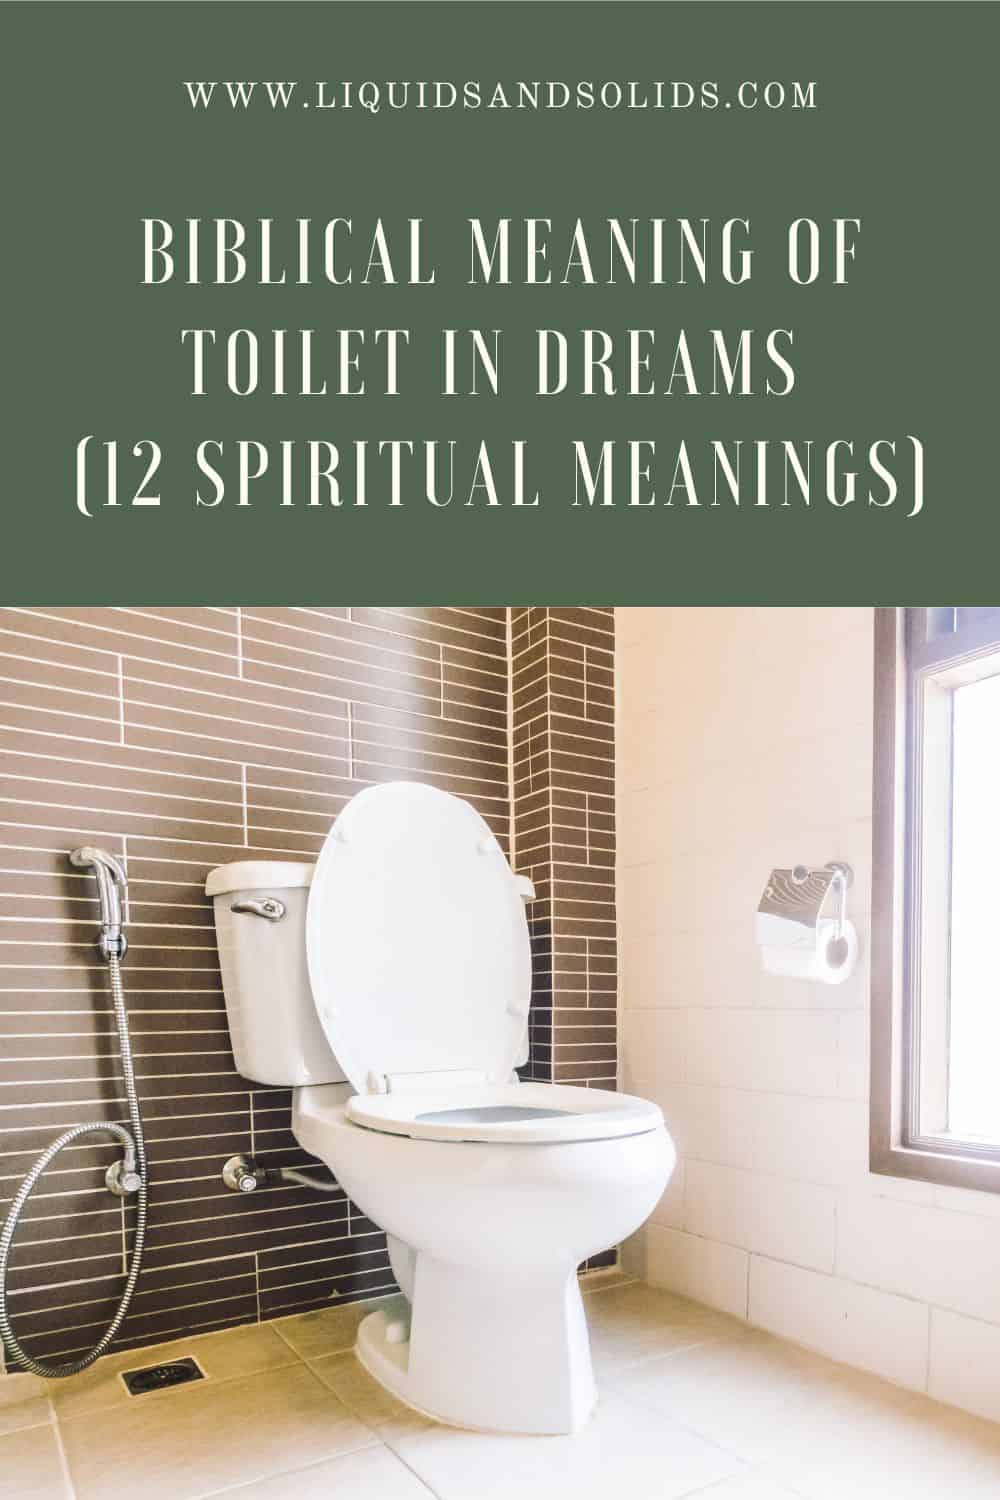 Biblical Meaning of Dreams about Toilets